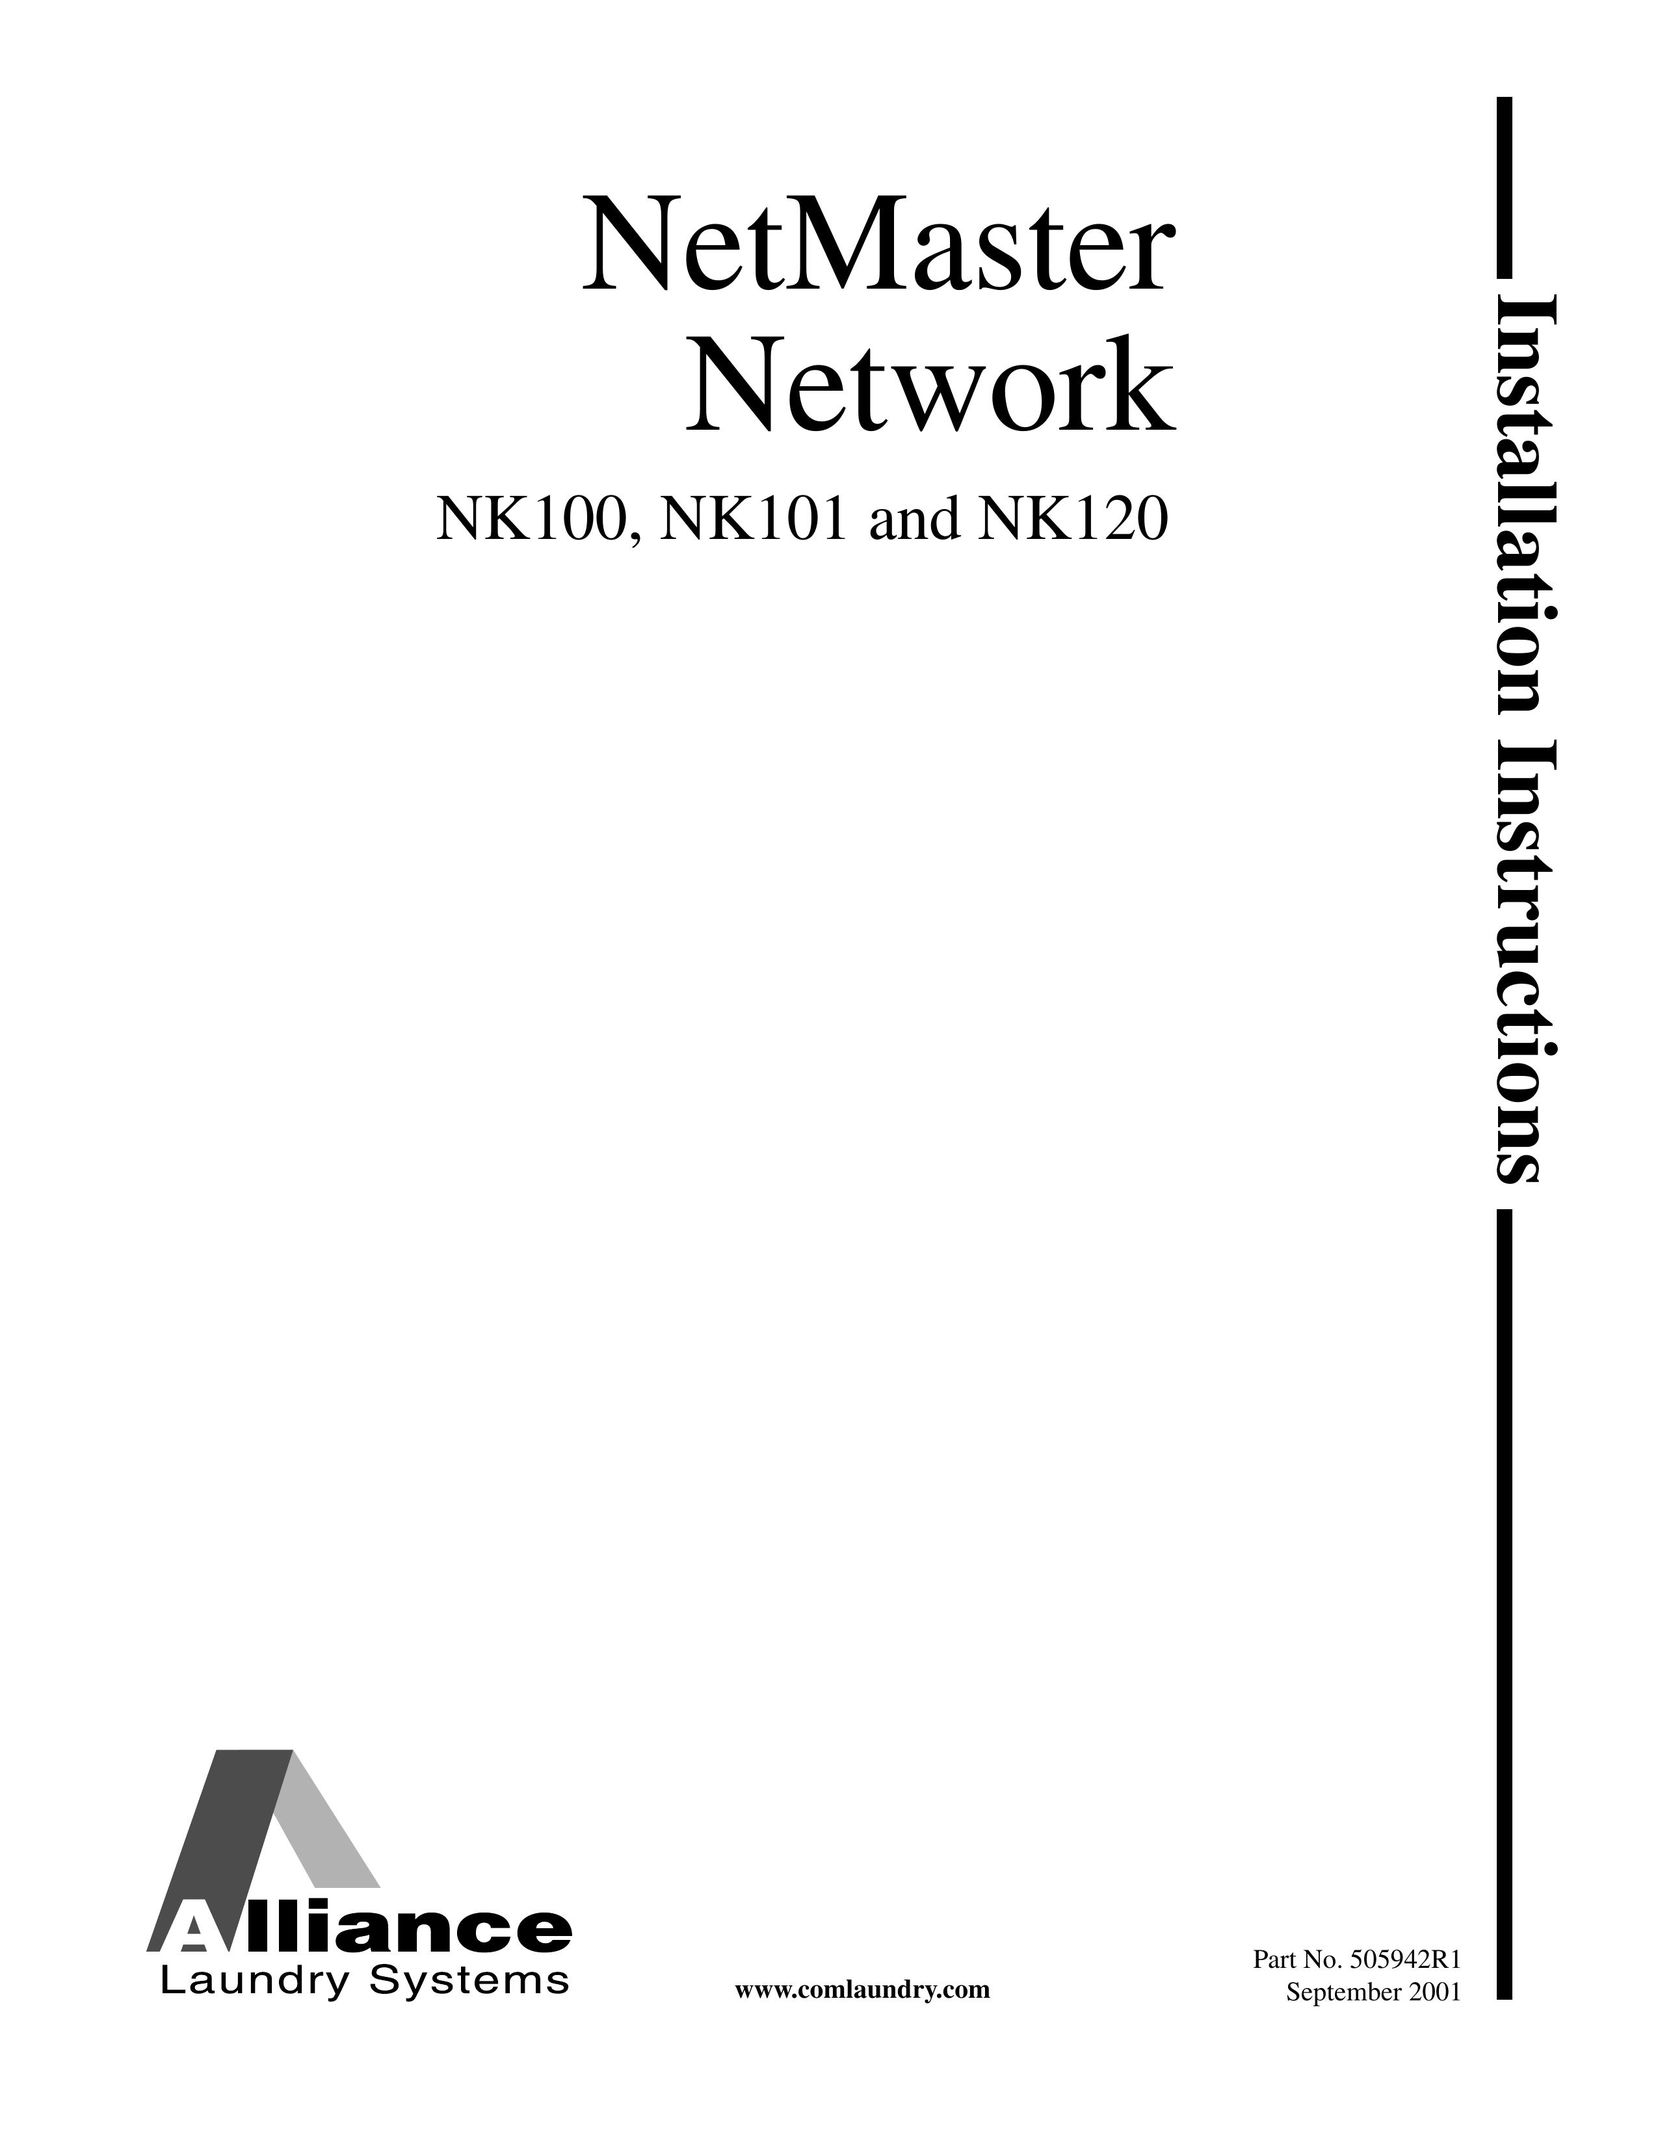 Alliance Laundry Systems NK100 Network Hardware User Manual